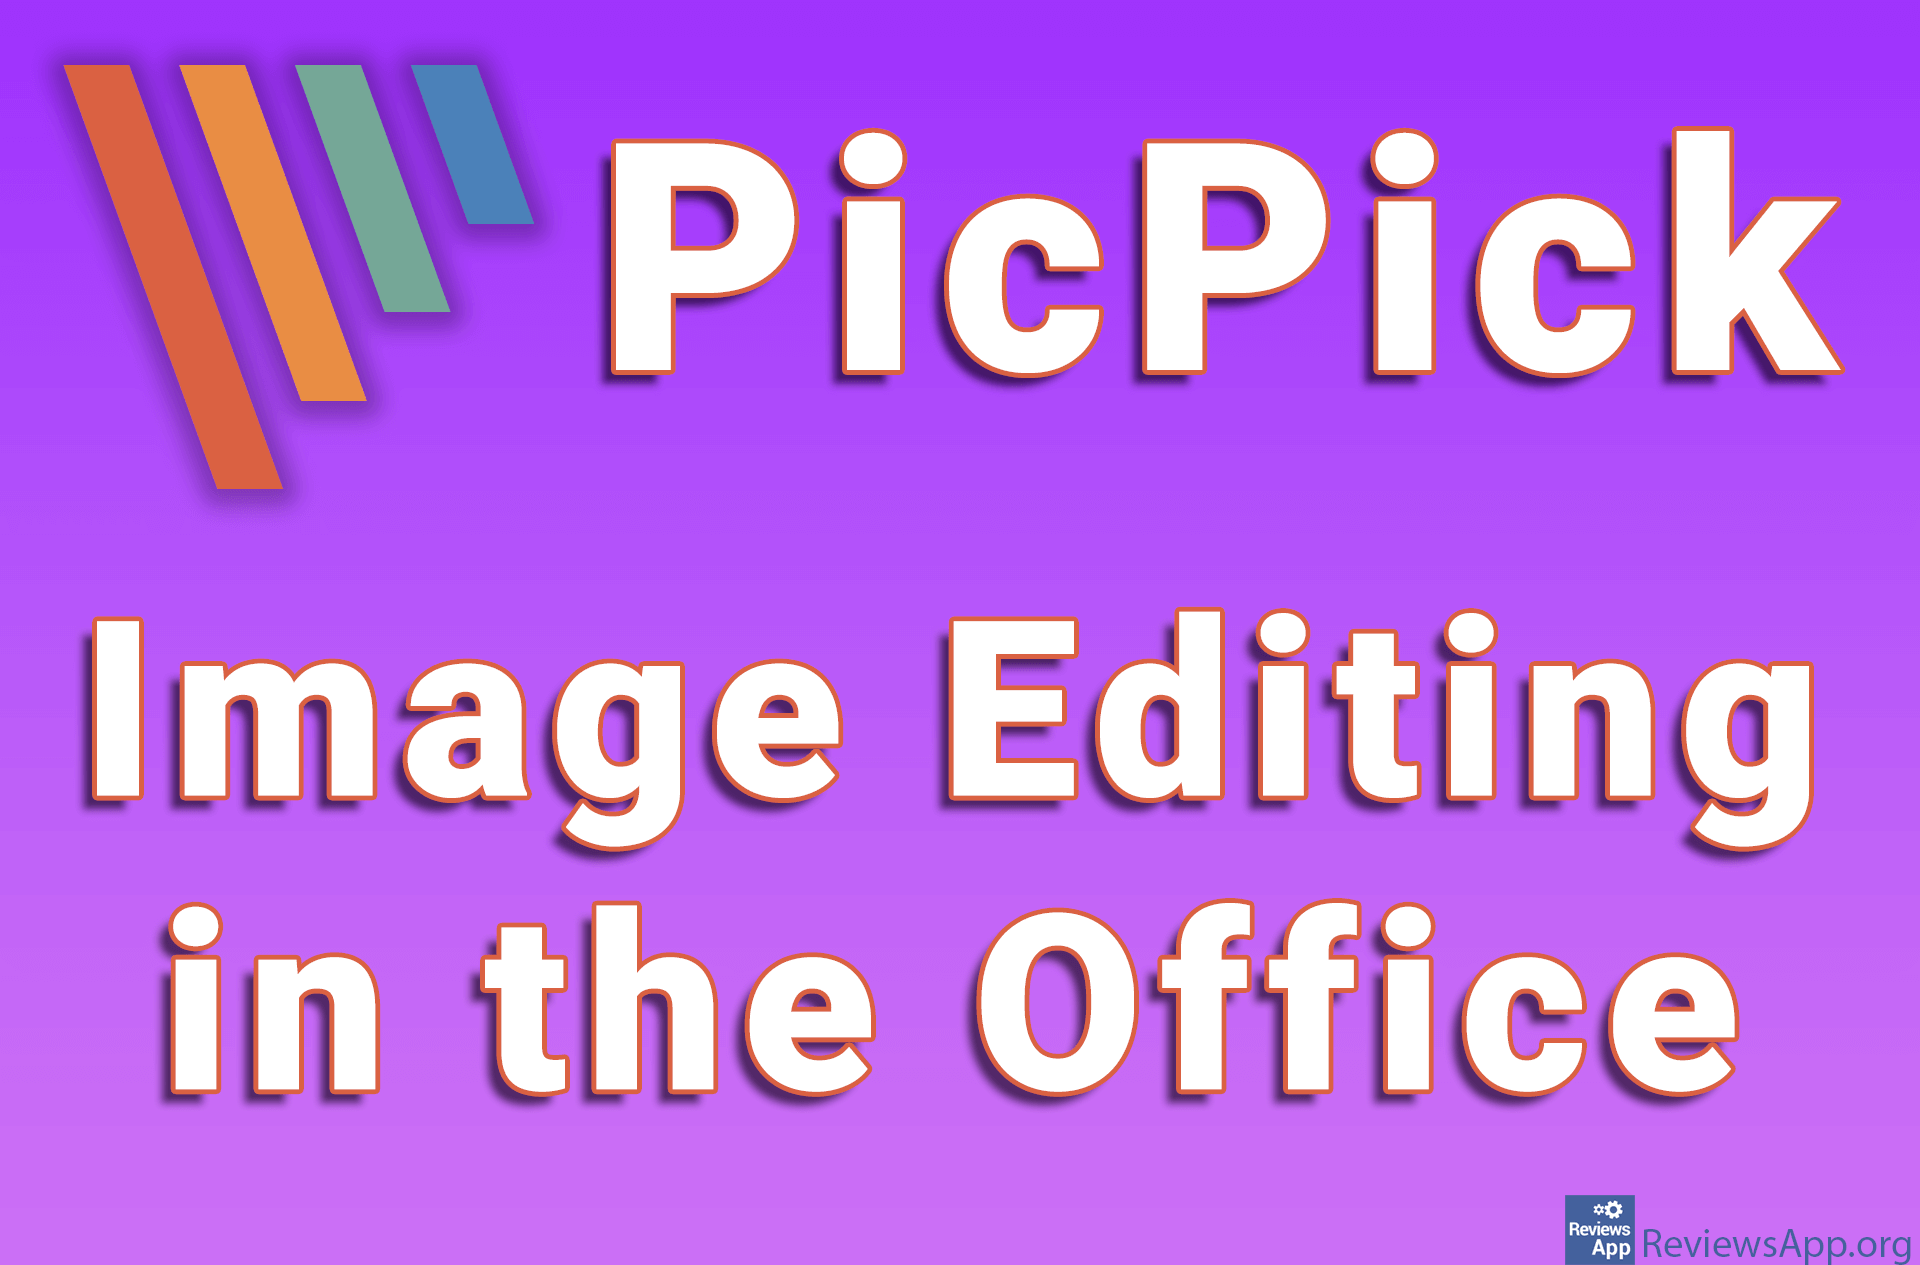 PicPick – Image Editing in the Office